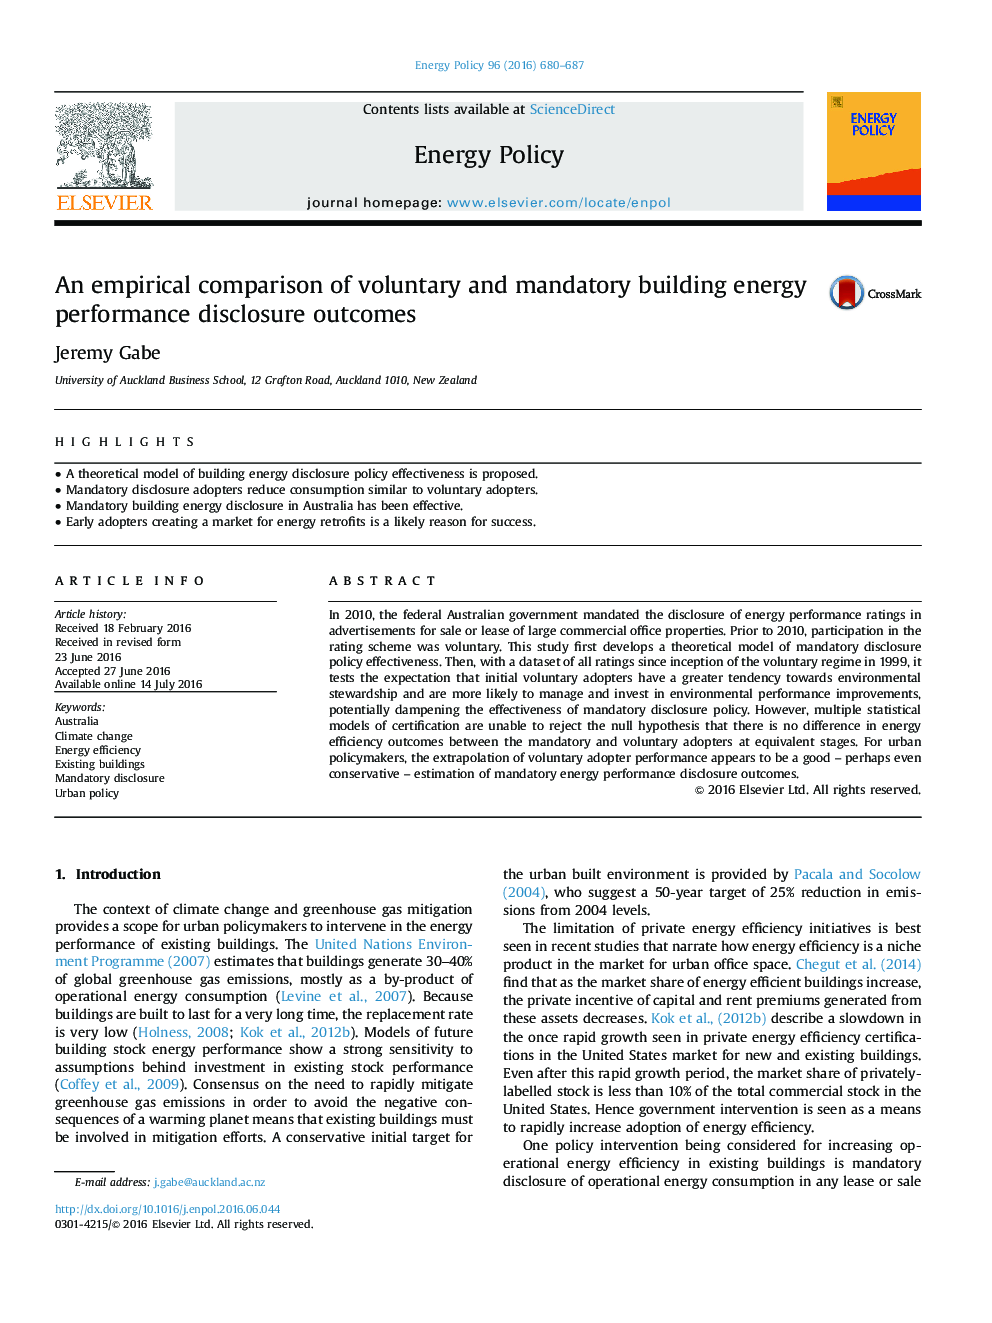 An empirical comparison of voluntary and mandatory building energy performance disclosure outcomes